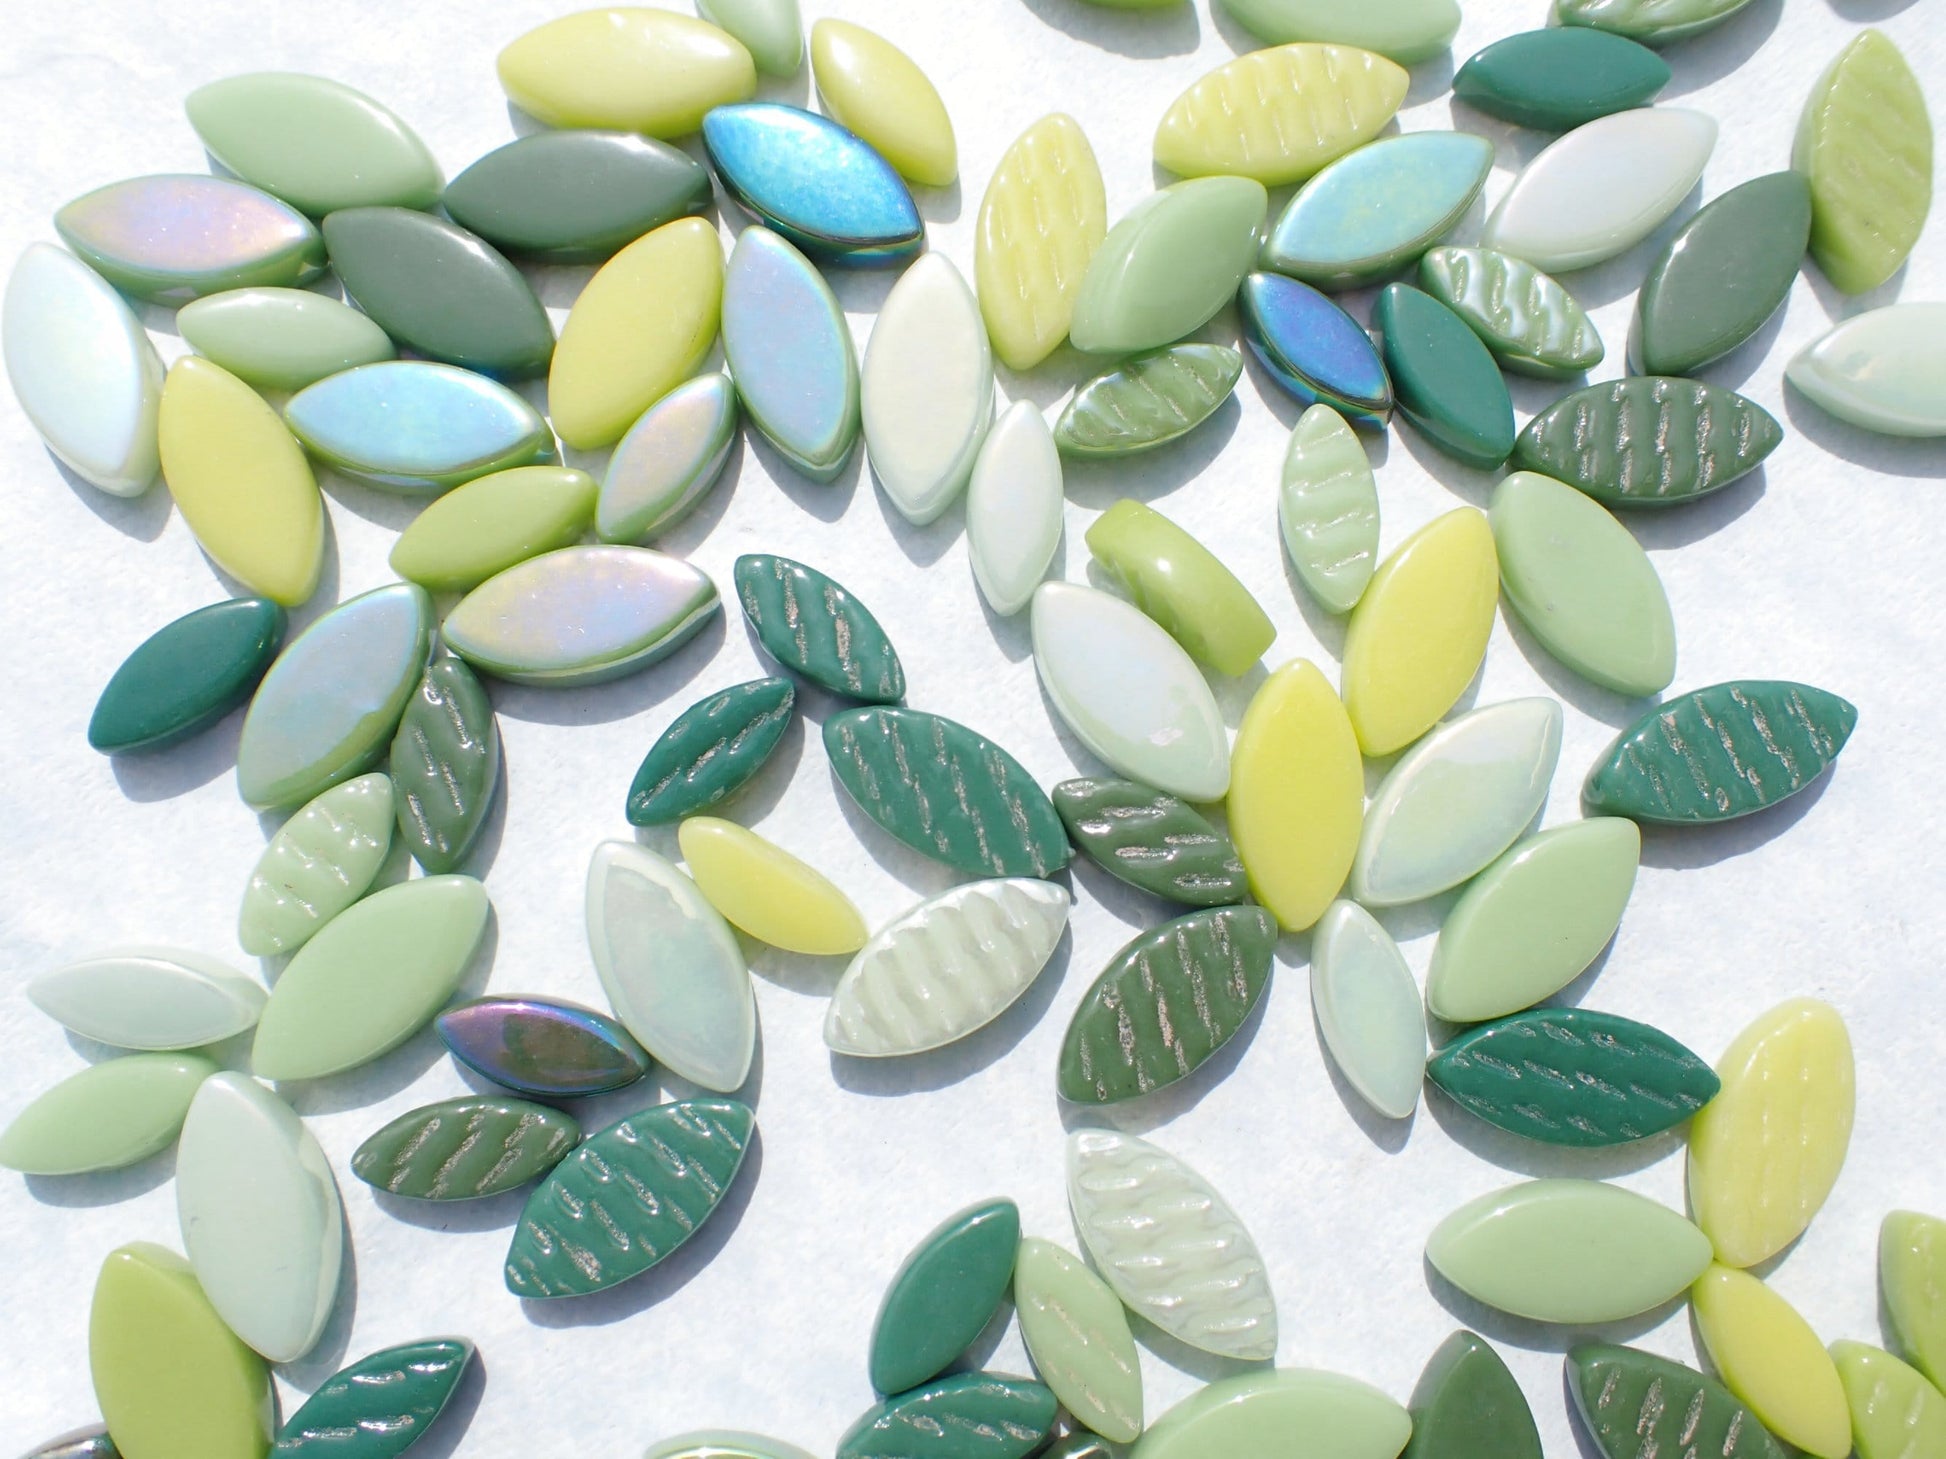 Green and Yellow Glass Leaves - 50g of Petals in 14mm and 19mm Mix of 2 Sizes - Lady's Mantle